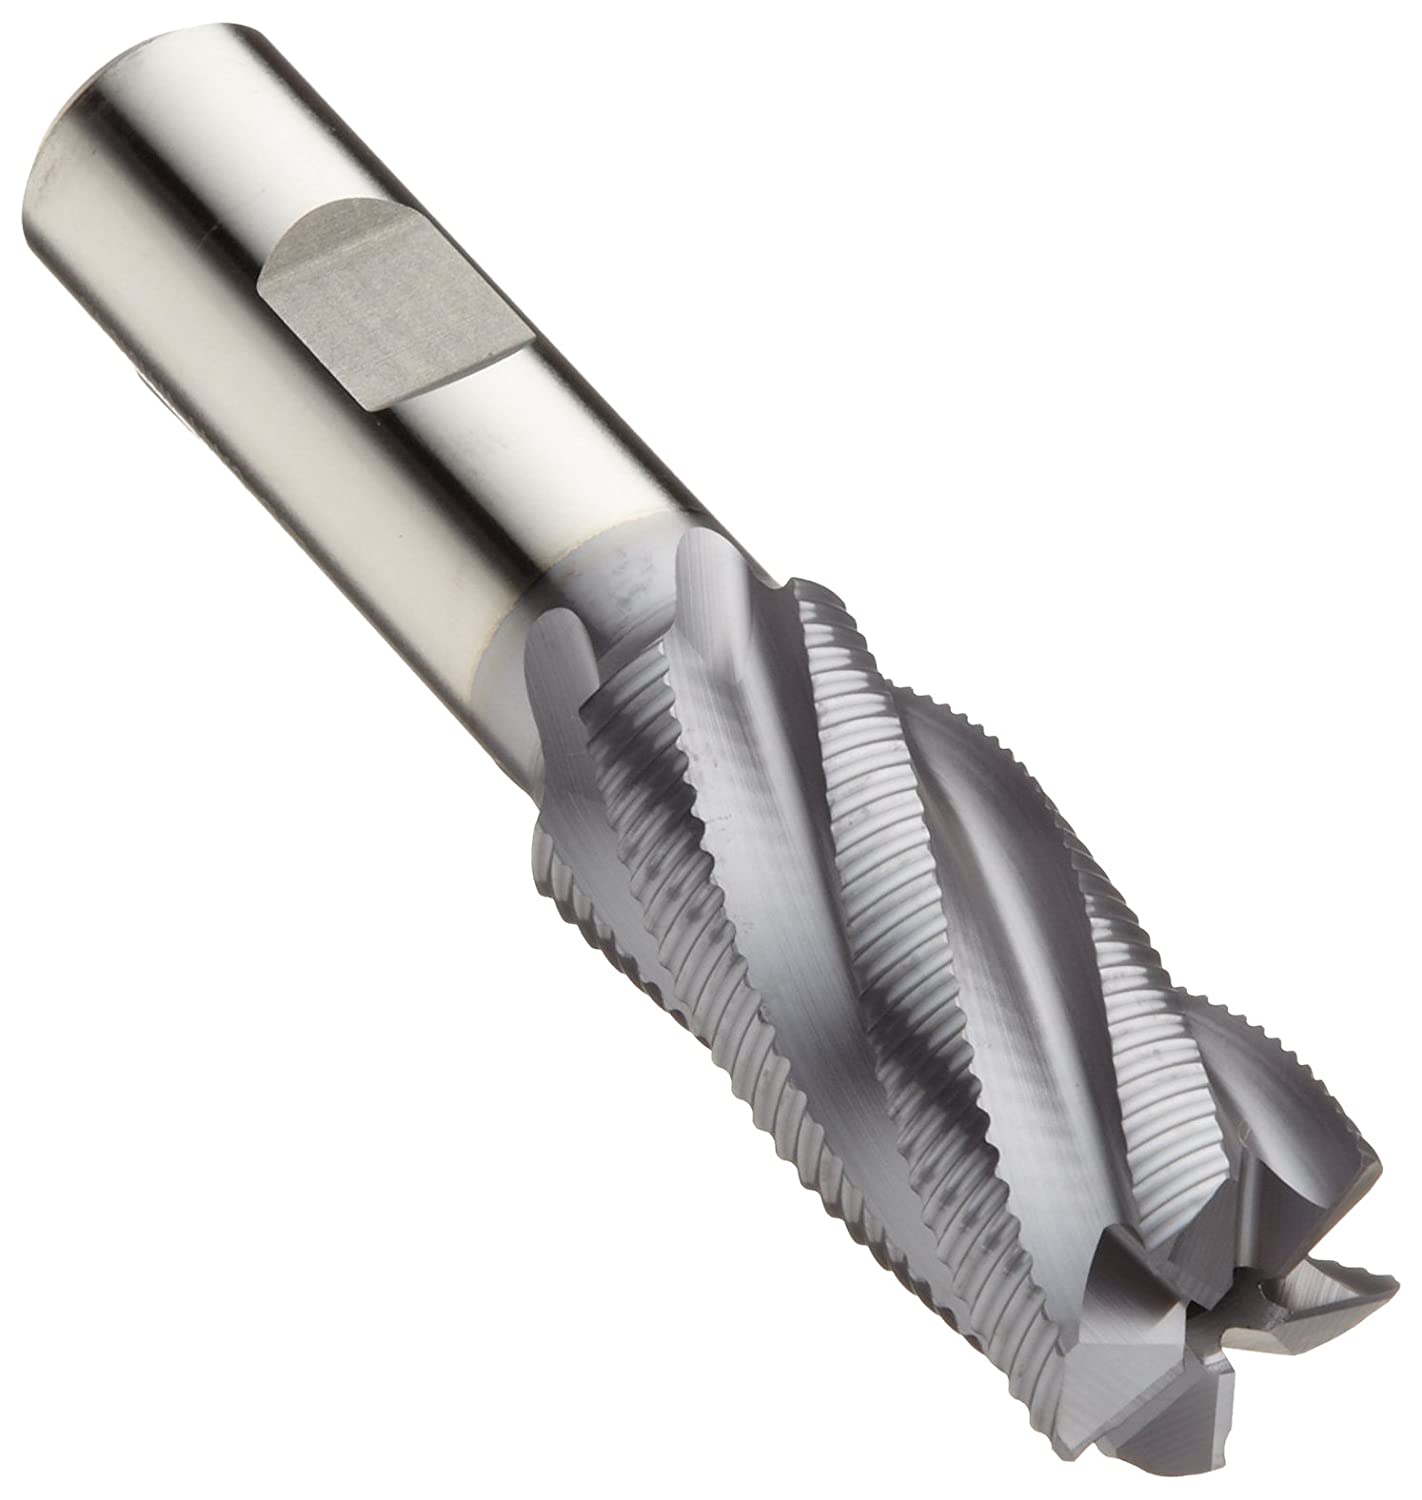 WOTEK two component end mills